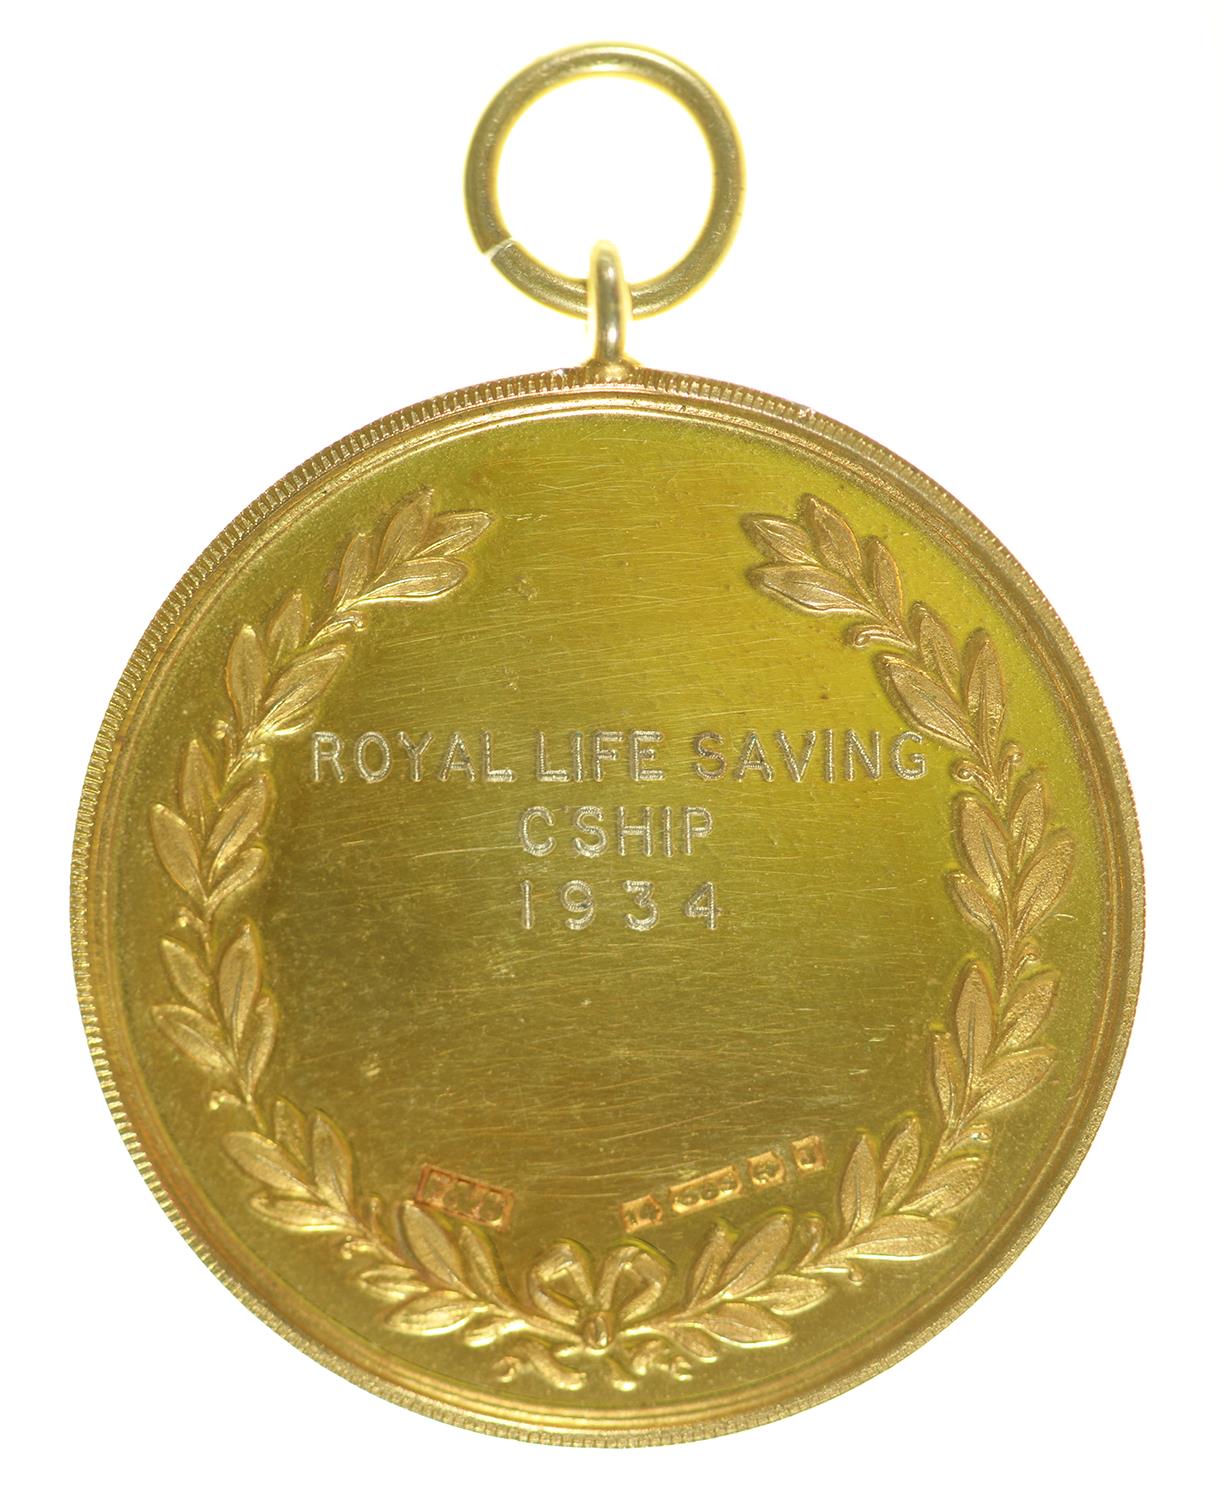 Police Athletic Association. Royal Life Saving Championship 1934 14ct gold medal, 33mm, by Fattorini - Image 2 of 2